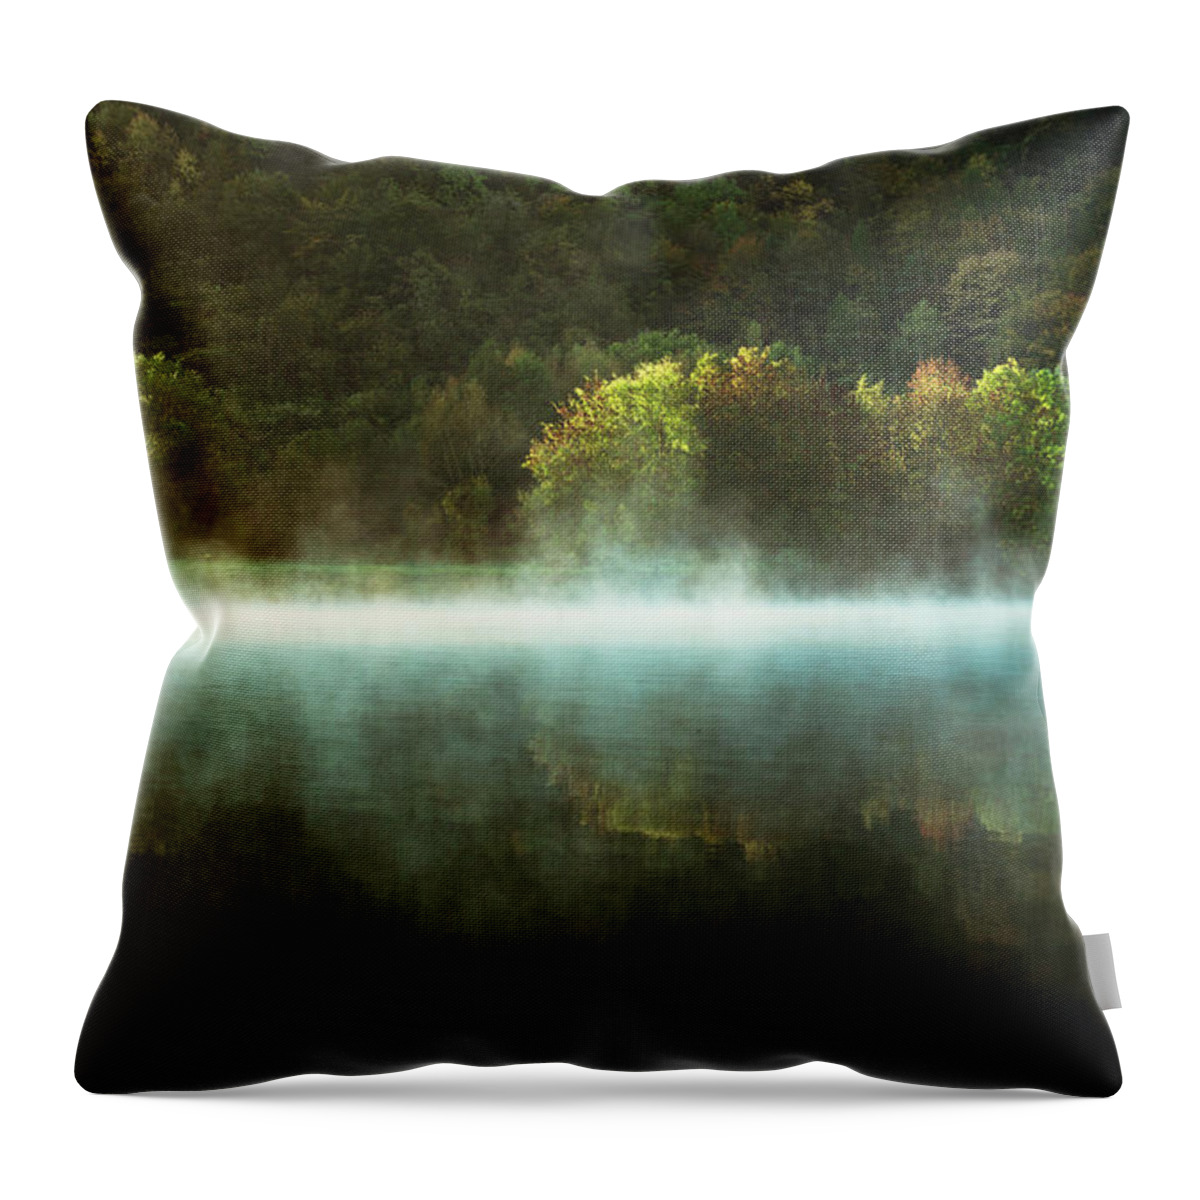 Tranquility Throw Pillow featuring the photograph Morning Glory by Jens Lumm